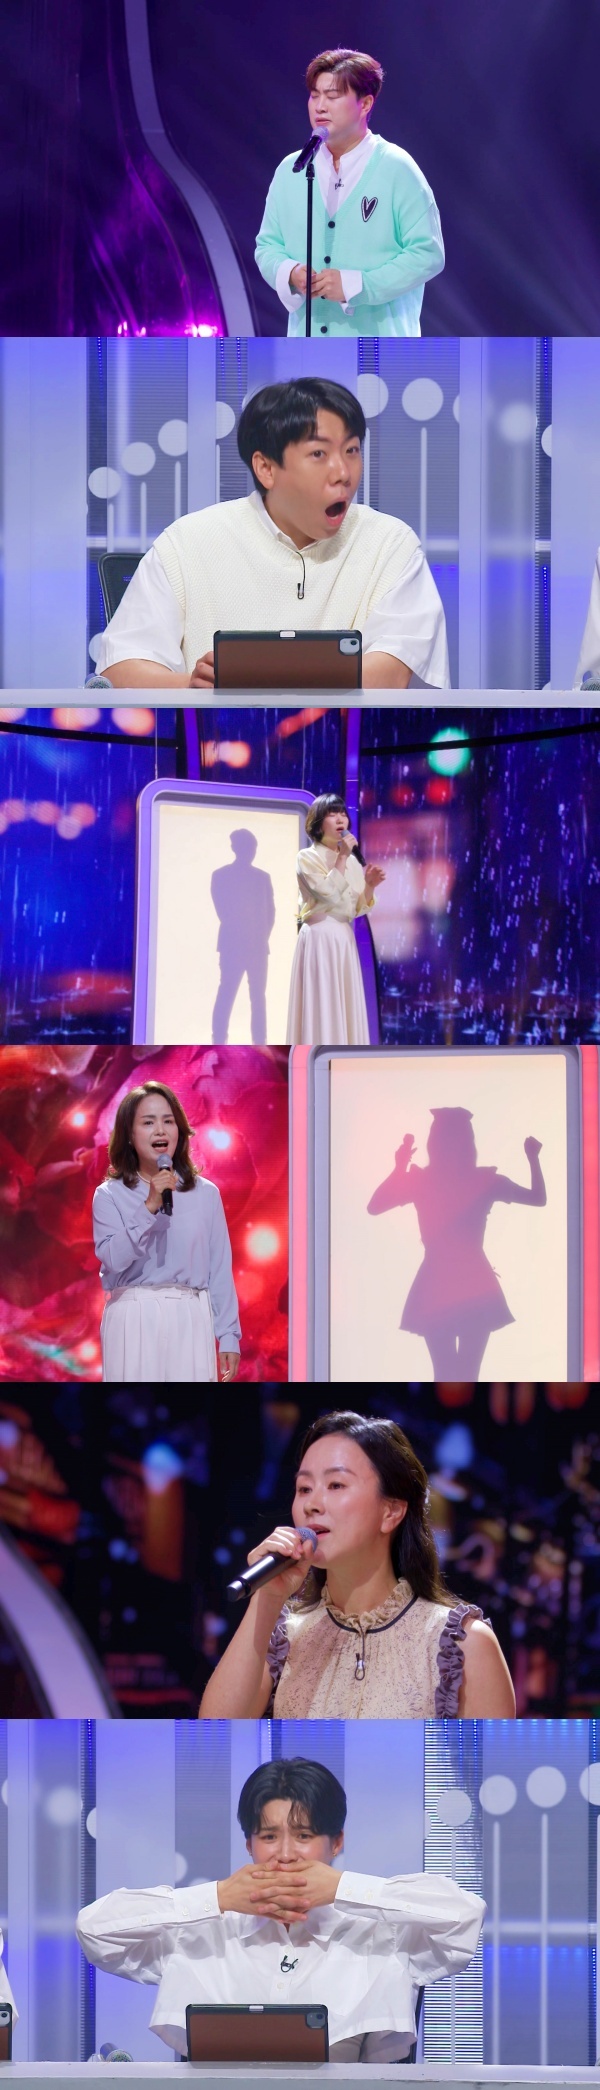 Seoul = = Singer Kim Ho-joong presents her amorous stage at DNA Singer - Fantastic Duo Family.On the 4th broadcast of SBS music mystery show DNA Singer - Fantastic Duo Family (hereinafter referred to as DNA Singer), super-studded stars who surprised everyone from their appearance will be released.The star who appeared for the first time at the time of the recent recording introduces himself as the national son-in-law and said, I often hear my sister saying, I want to be a son-in-law, I want to be my son-in-law.When the judges asked, What charm did you capture your sisters hearts? It is not bad, but it seems to be because of my voice and song.I also asked the star how far it was her sisters standard, and the star said, All under 100 years old are sisters.Since then, the stage of DNA Singer has also been revealed as a talented person who owns the singing ability of the past as well as the star, and MC Yang Se-chan said, It is the first of the Family so far!He praised the star familys identity and made him more curious.Finally, the Identity of the star everyone was curious about was revealed, and MC Yang Se-chan was surprised to say, Why are you out here!The next star introduced himself as a star who was born, and said, I took more than 10 commercials thanks to the job.In particular, BTS, Twice, Exo, Kang Ho-dong and other top stars have become more famous after following my work, raising expectations for star Identity.The DNA Singer, which appeared afterwards, also made all the judges creep with the sophisticated stage manners and the high sound that overwhelmed the scene in the solo stage, further amplifying their curiosity about Identity.In addition, Singer Kim Ho-joongs other special stage, Amo, which was the first to broadcast a new song The Lighting Man on the last broadcast, was released.Amo is a song he sang thinking about Grandmas Boy, and he hopes to be impressed.The identity of the mini-homepage star, which has caused the purchase of acorns during the mini-homepage, will also be revealed.DNA Singer will air at 9 p.m. on the day.